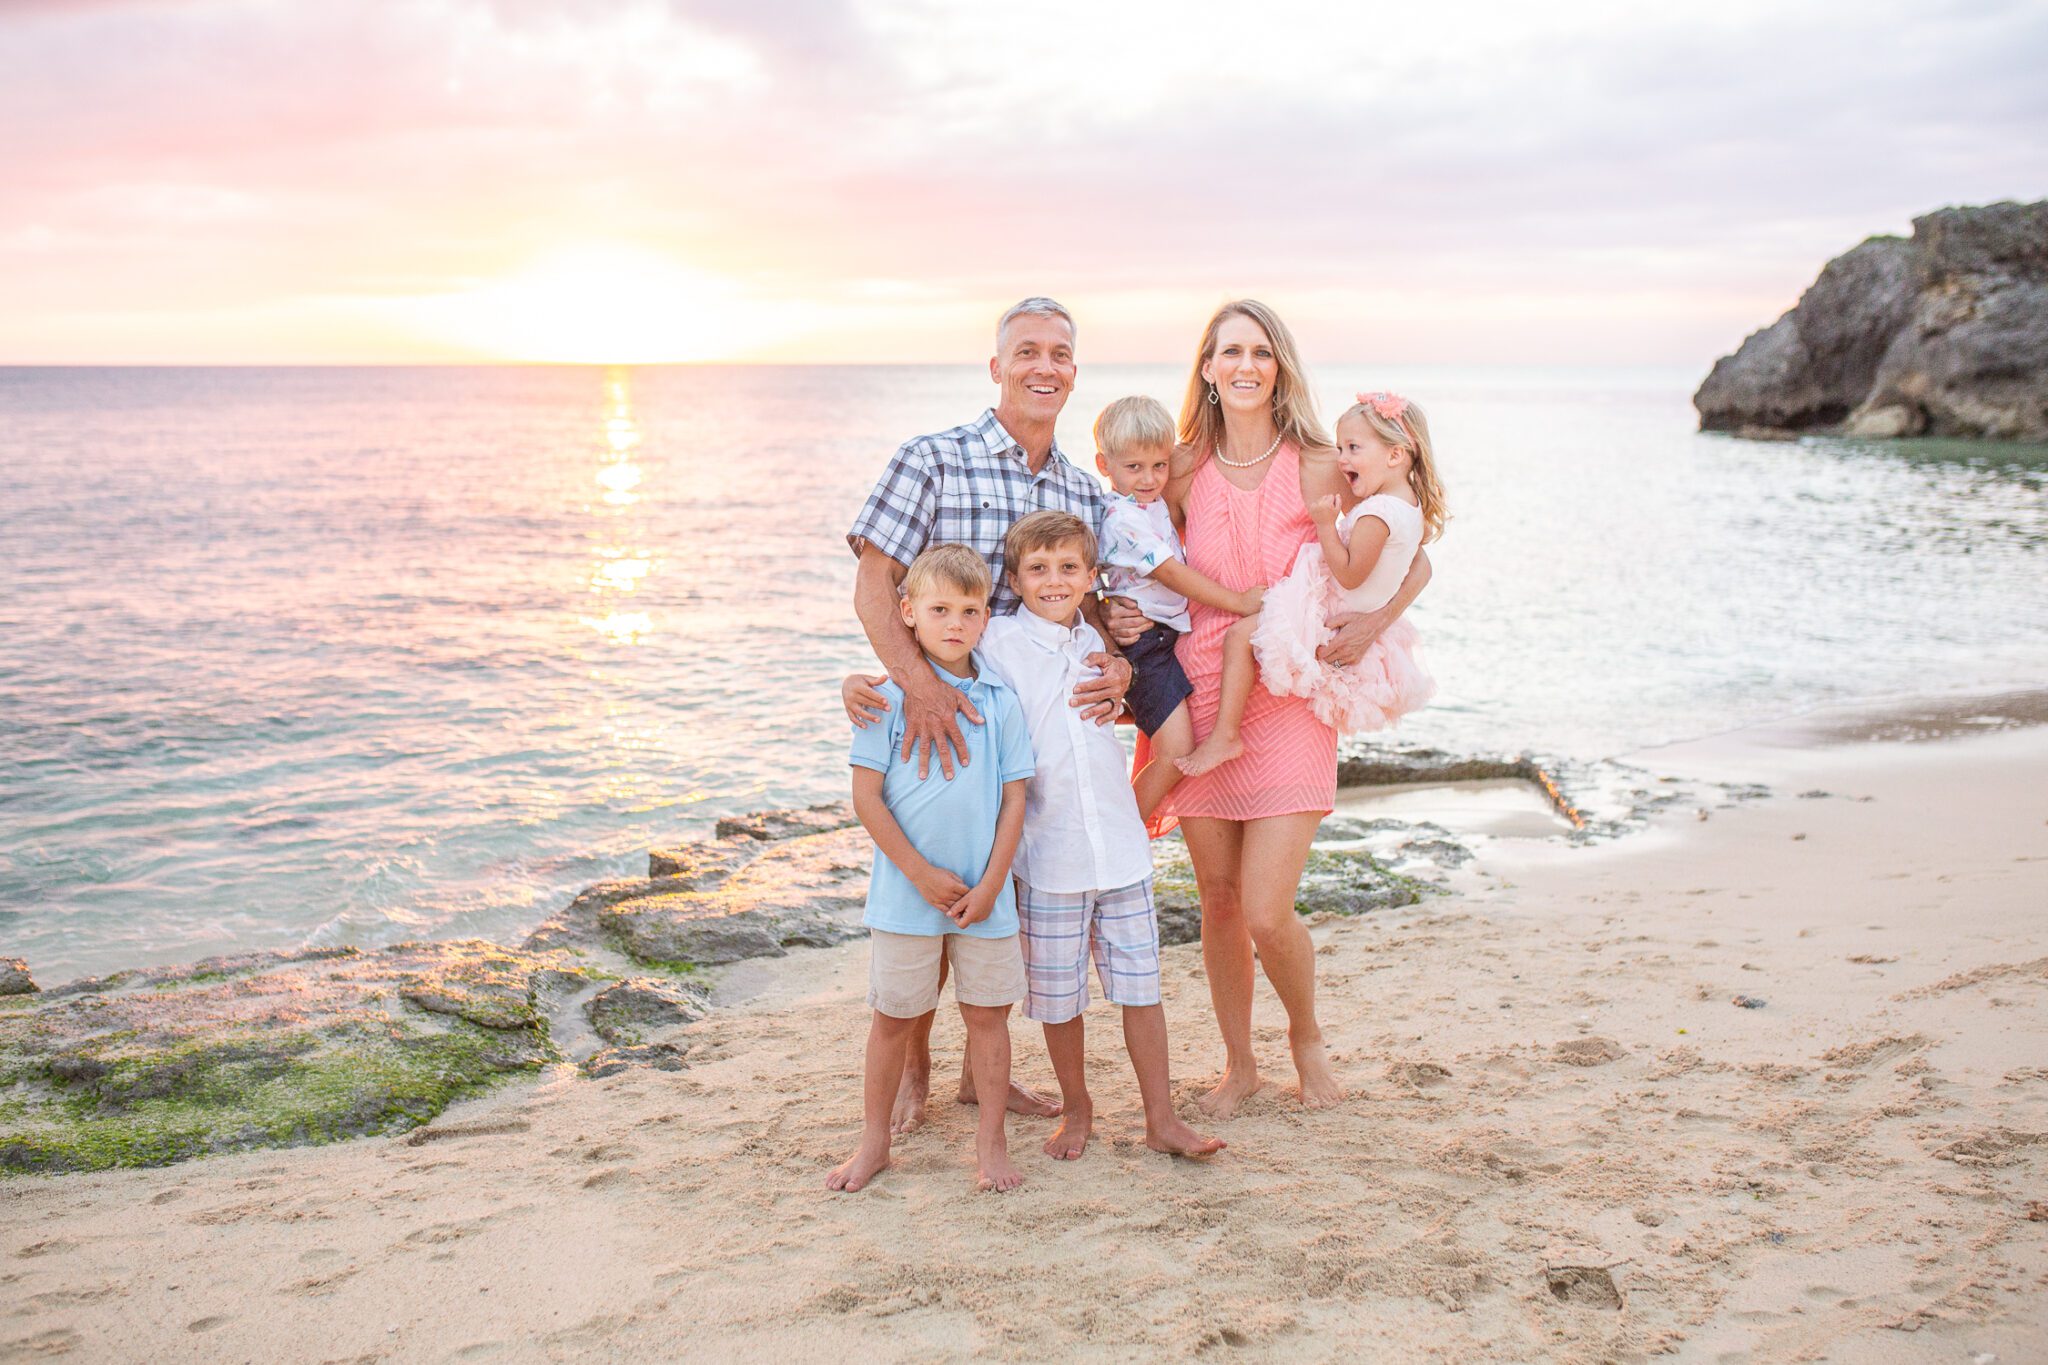 hawaii family photo outfits by alison bell photographer